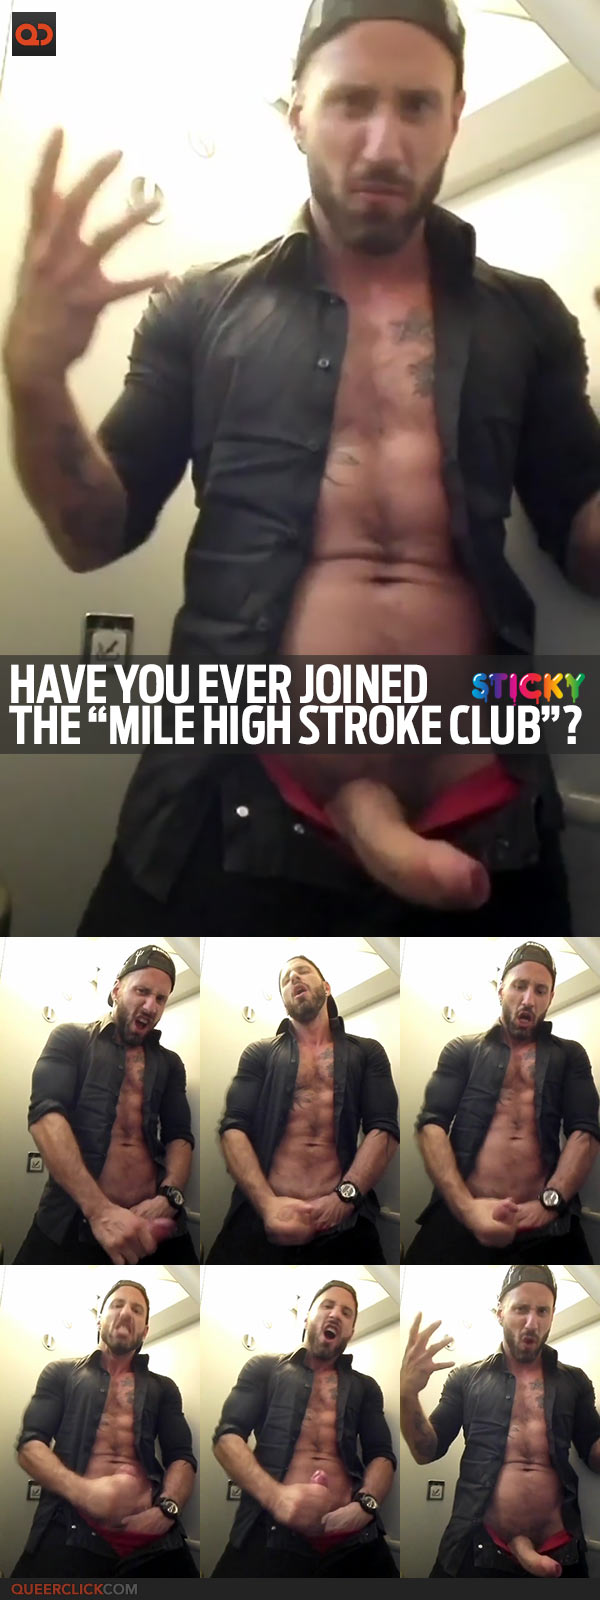 Have You Ever Joined The “Mile High Stroke Club”?